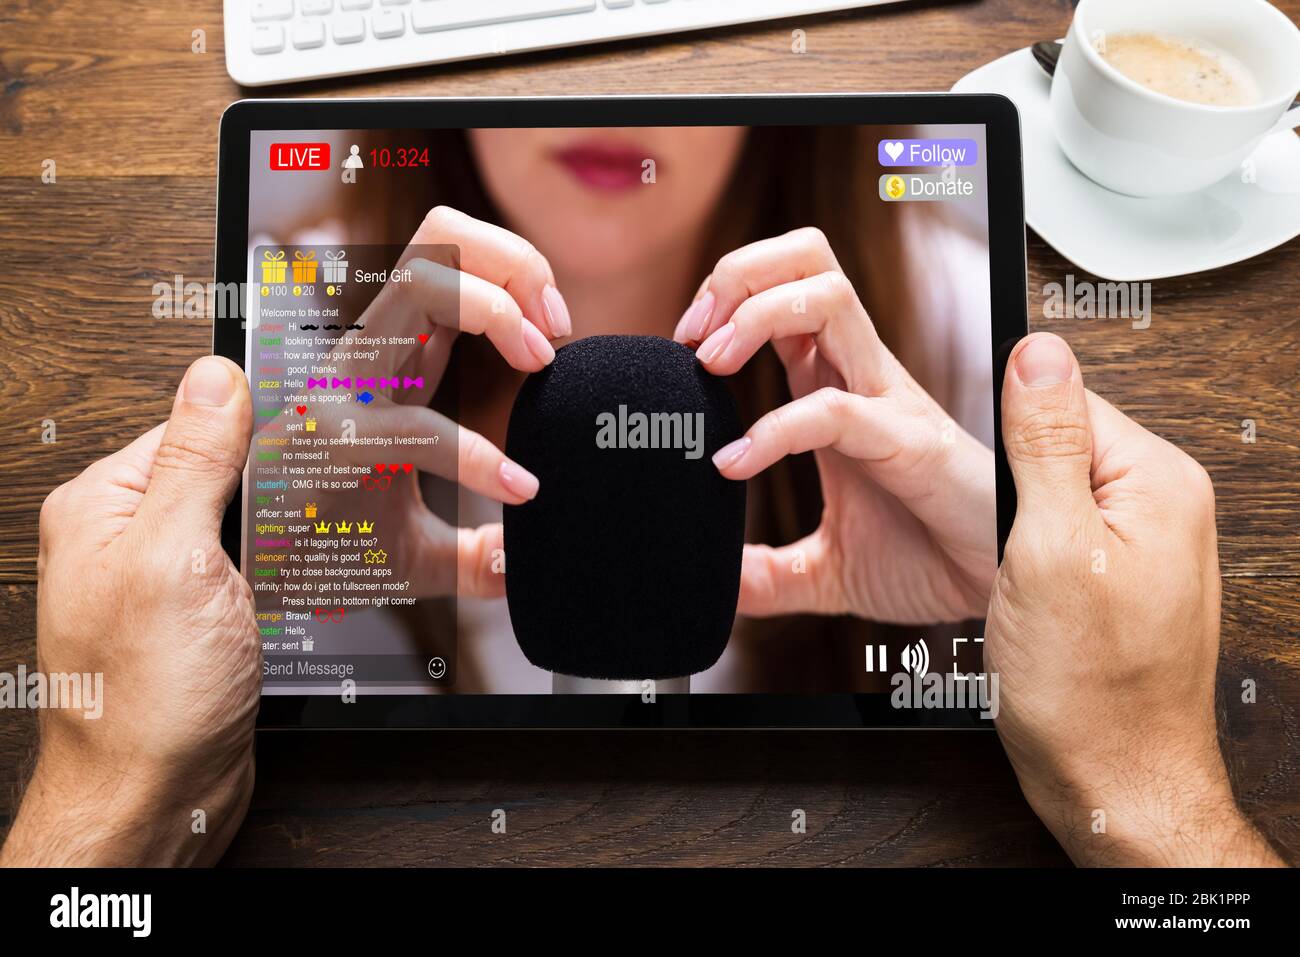 Streaming Live ASMR Video On Tablet Computer Stock Photo